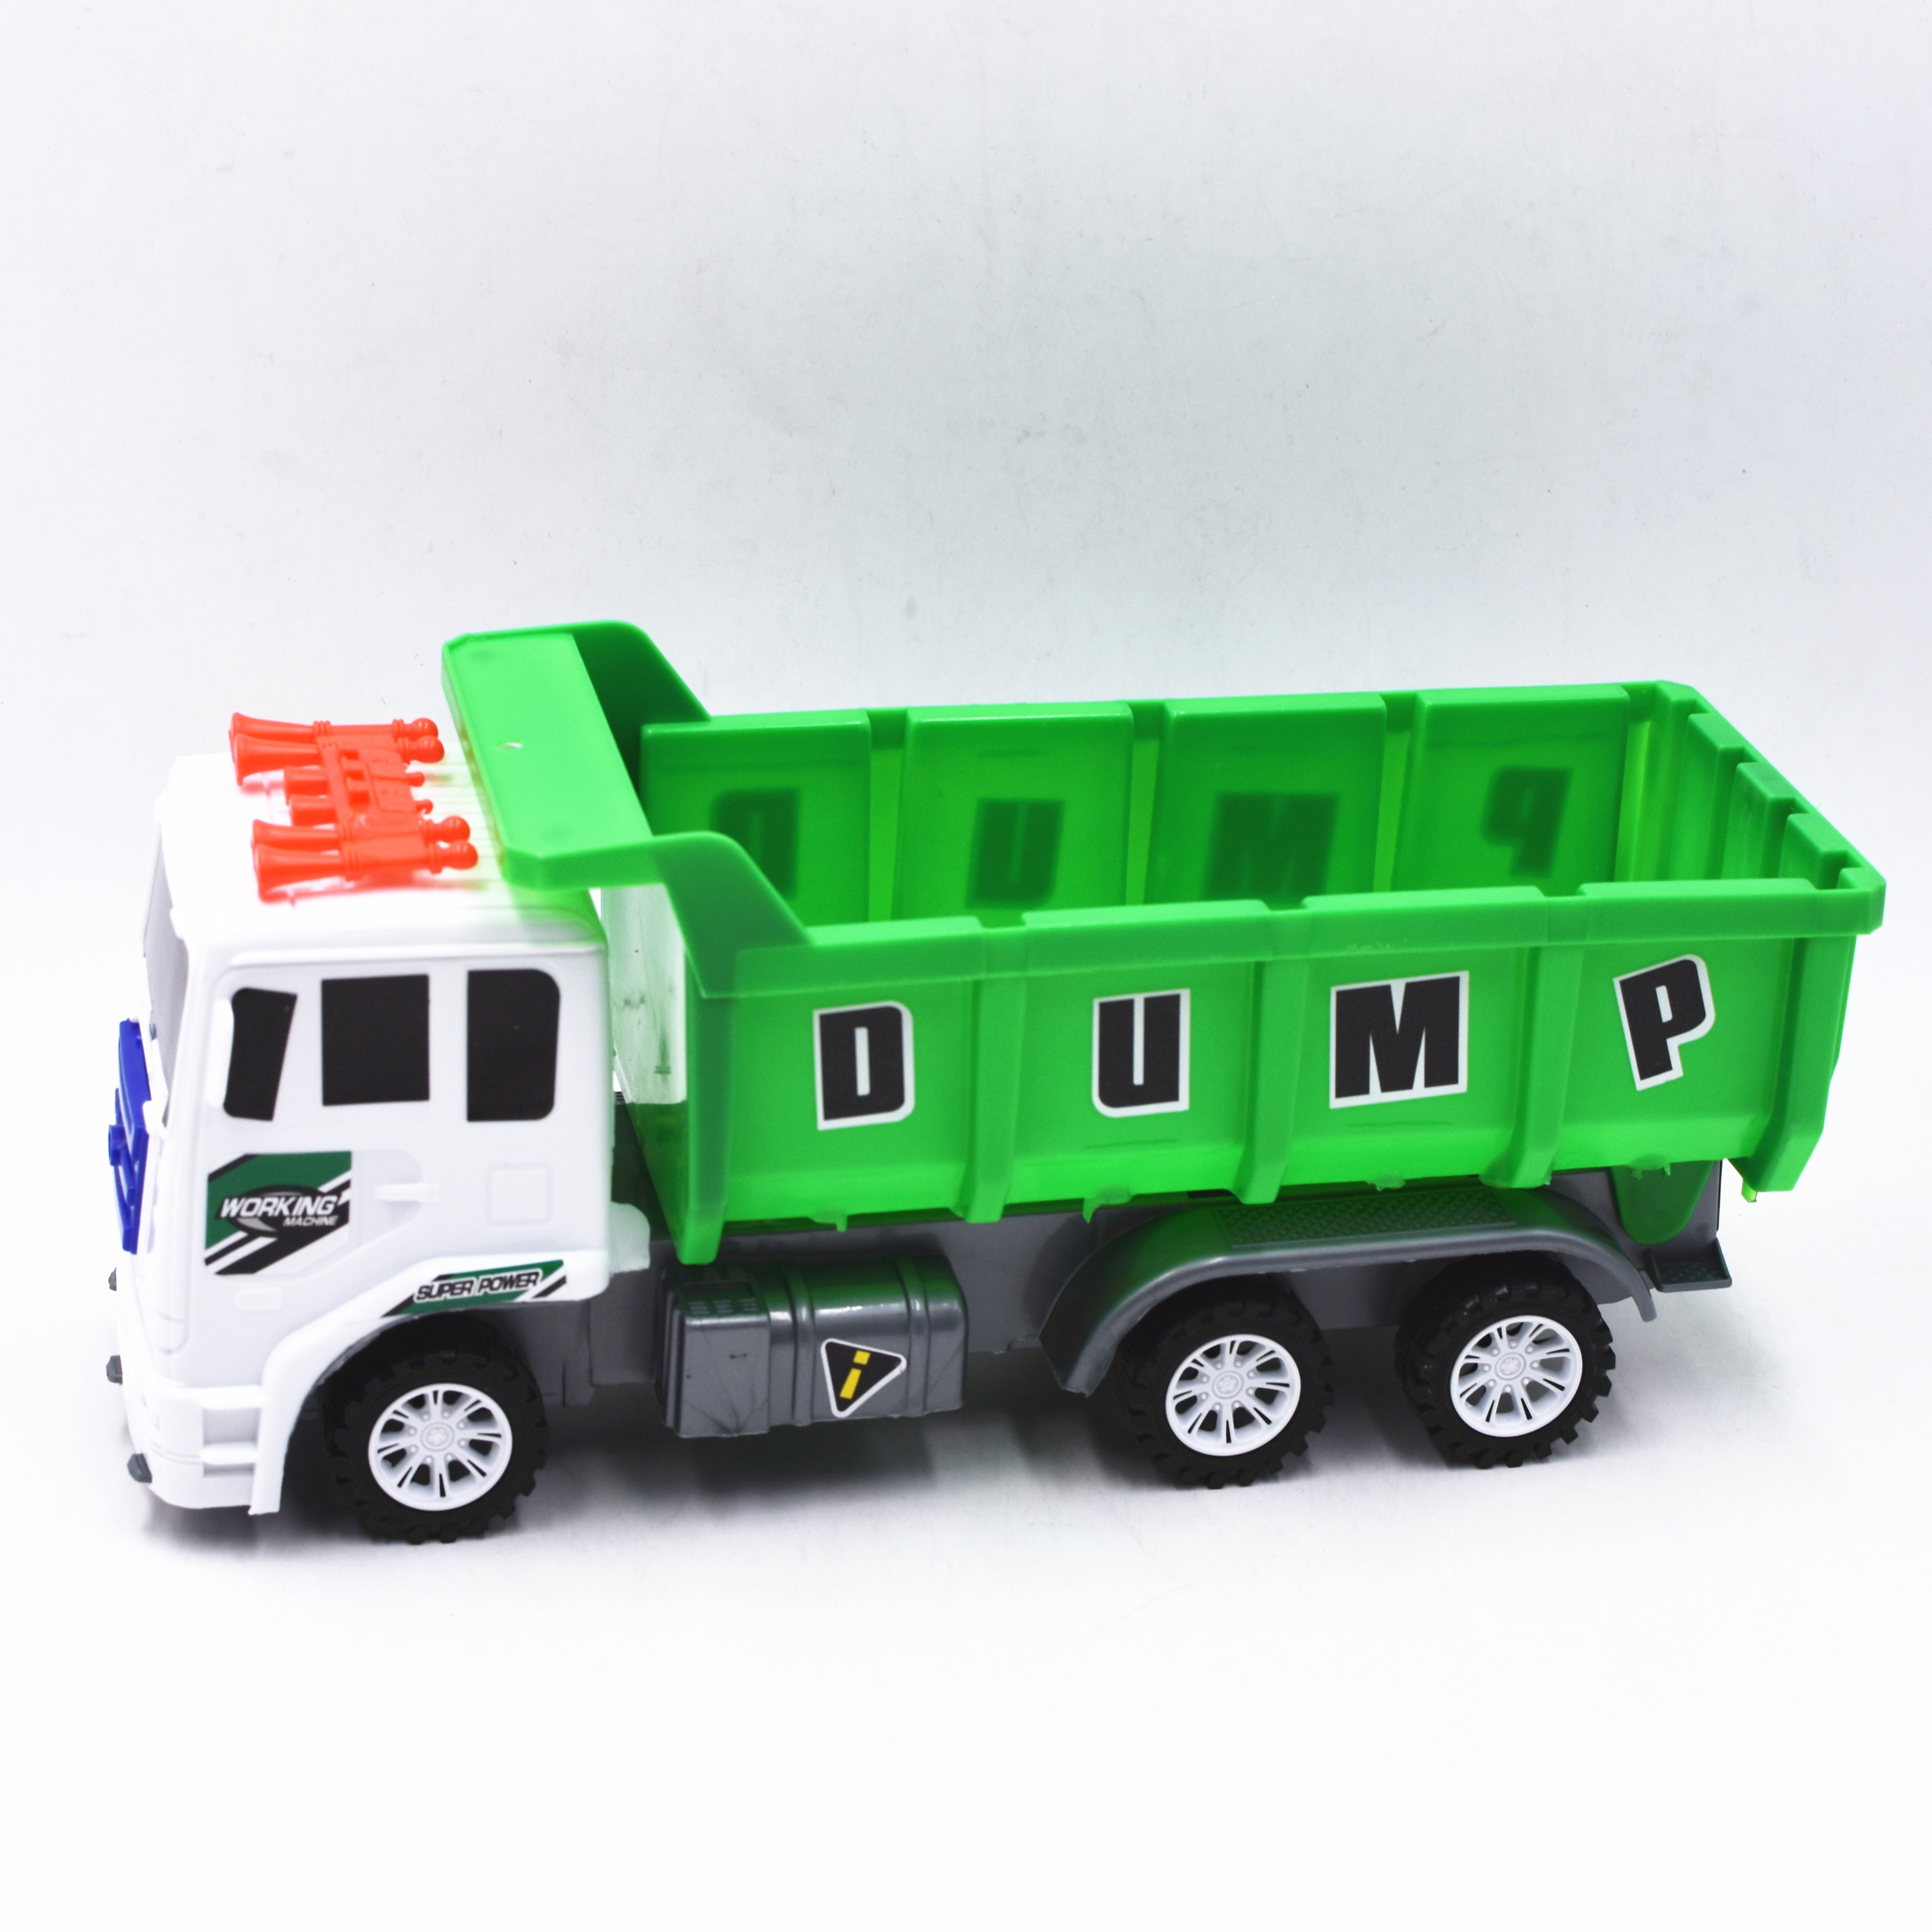 FREE WHEEL TRUCK TOY LY1753